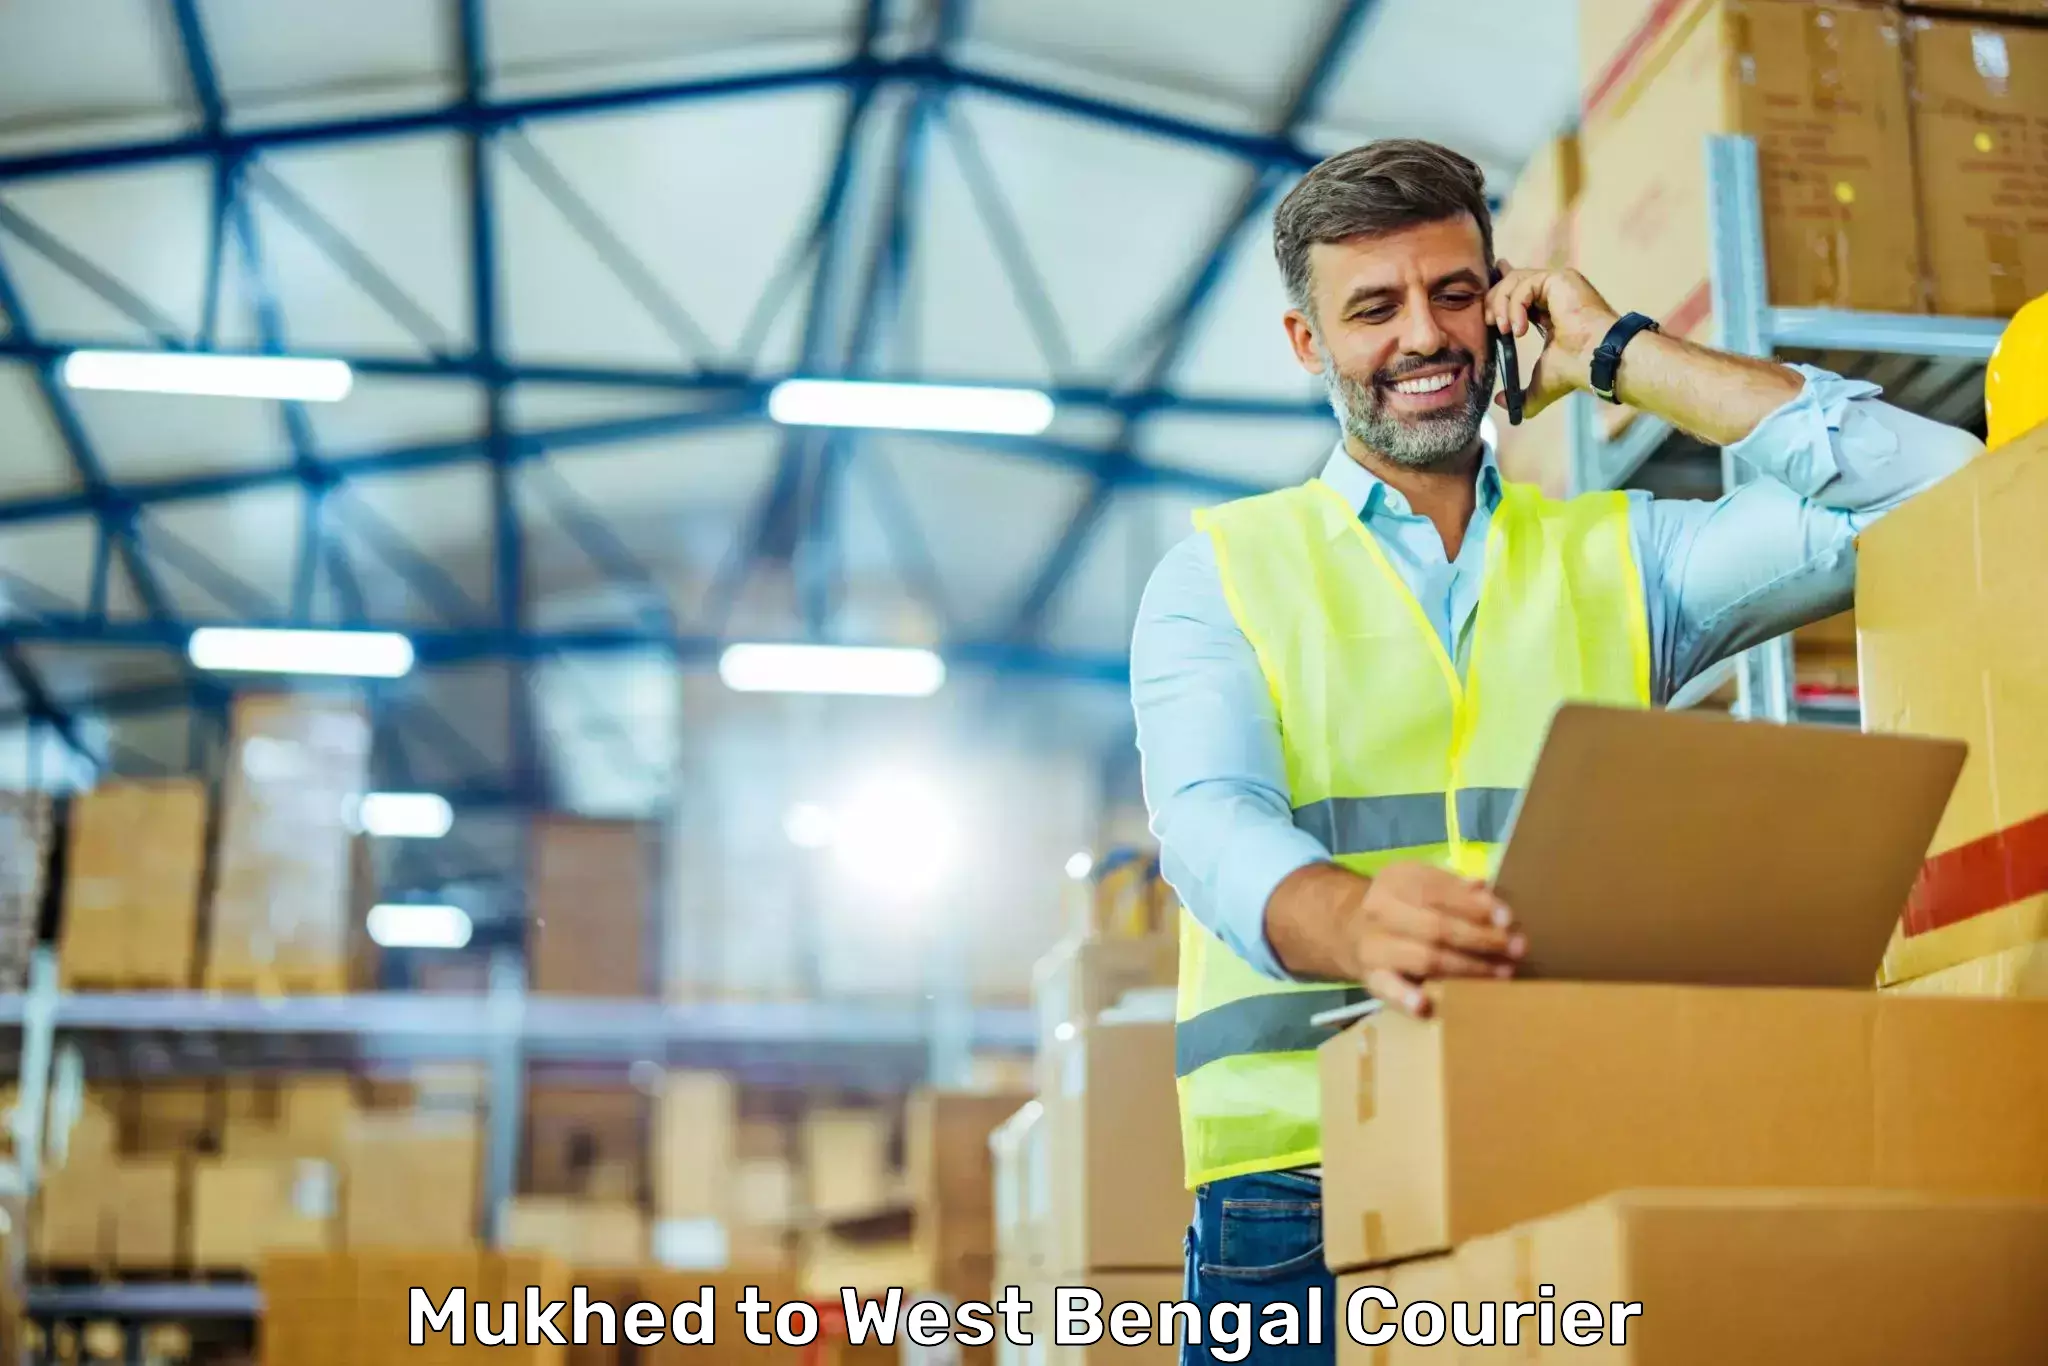 Courier service booking Mukhed to Kolkata Port